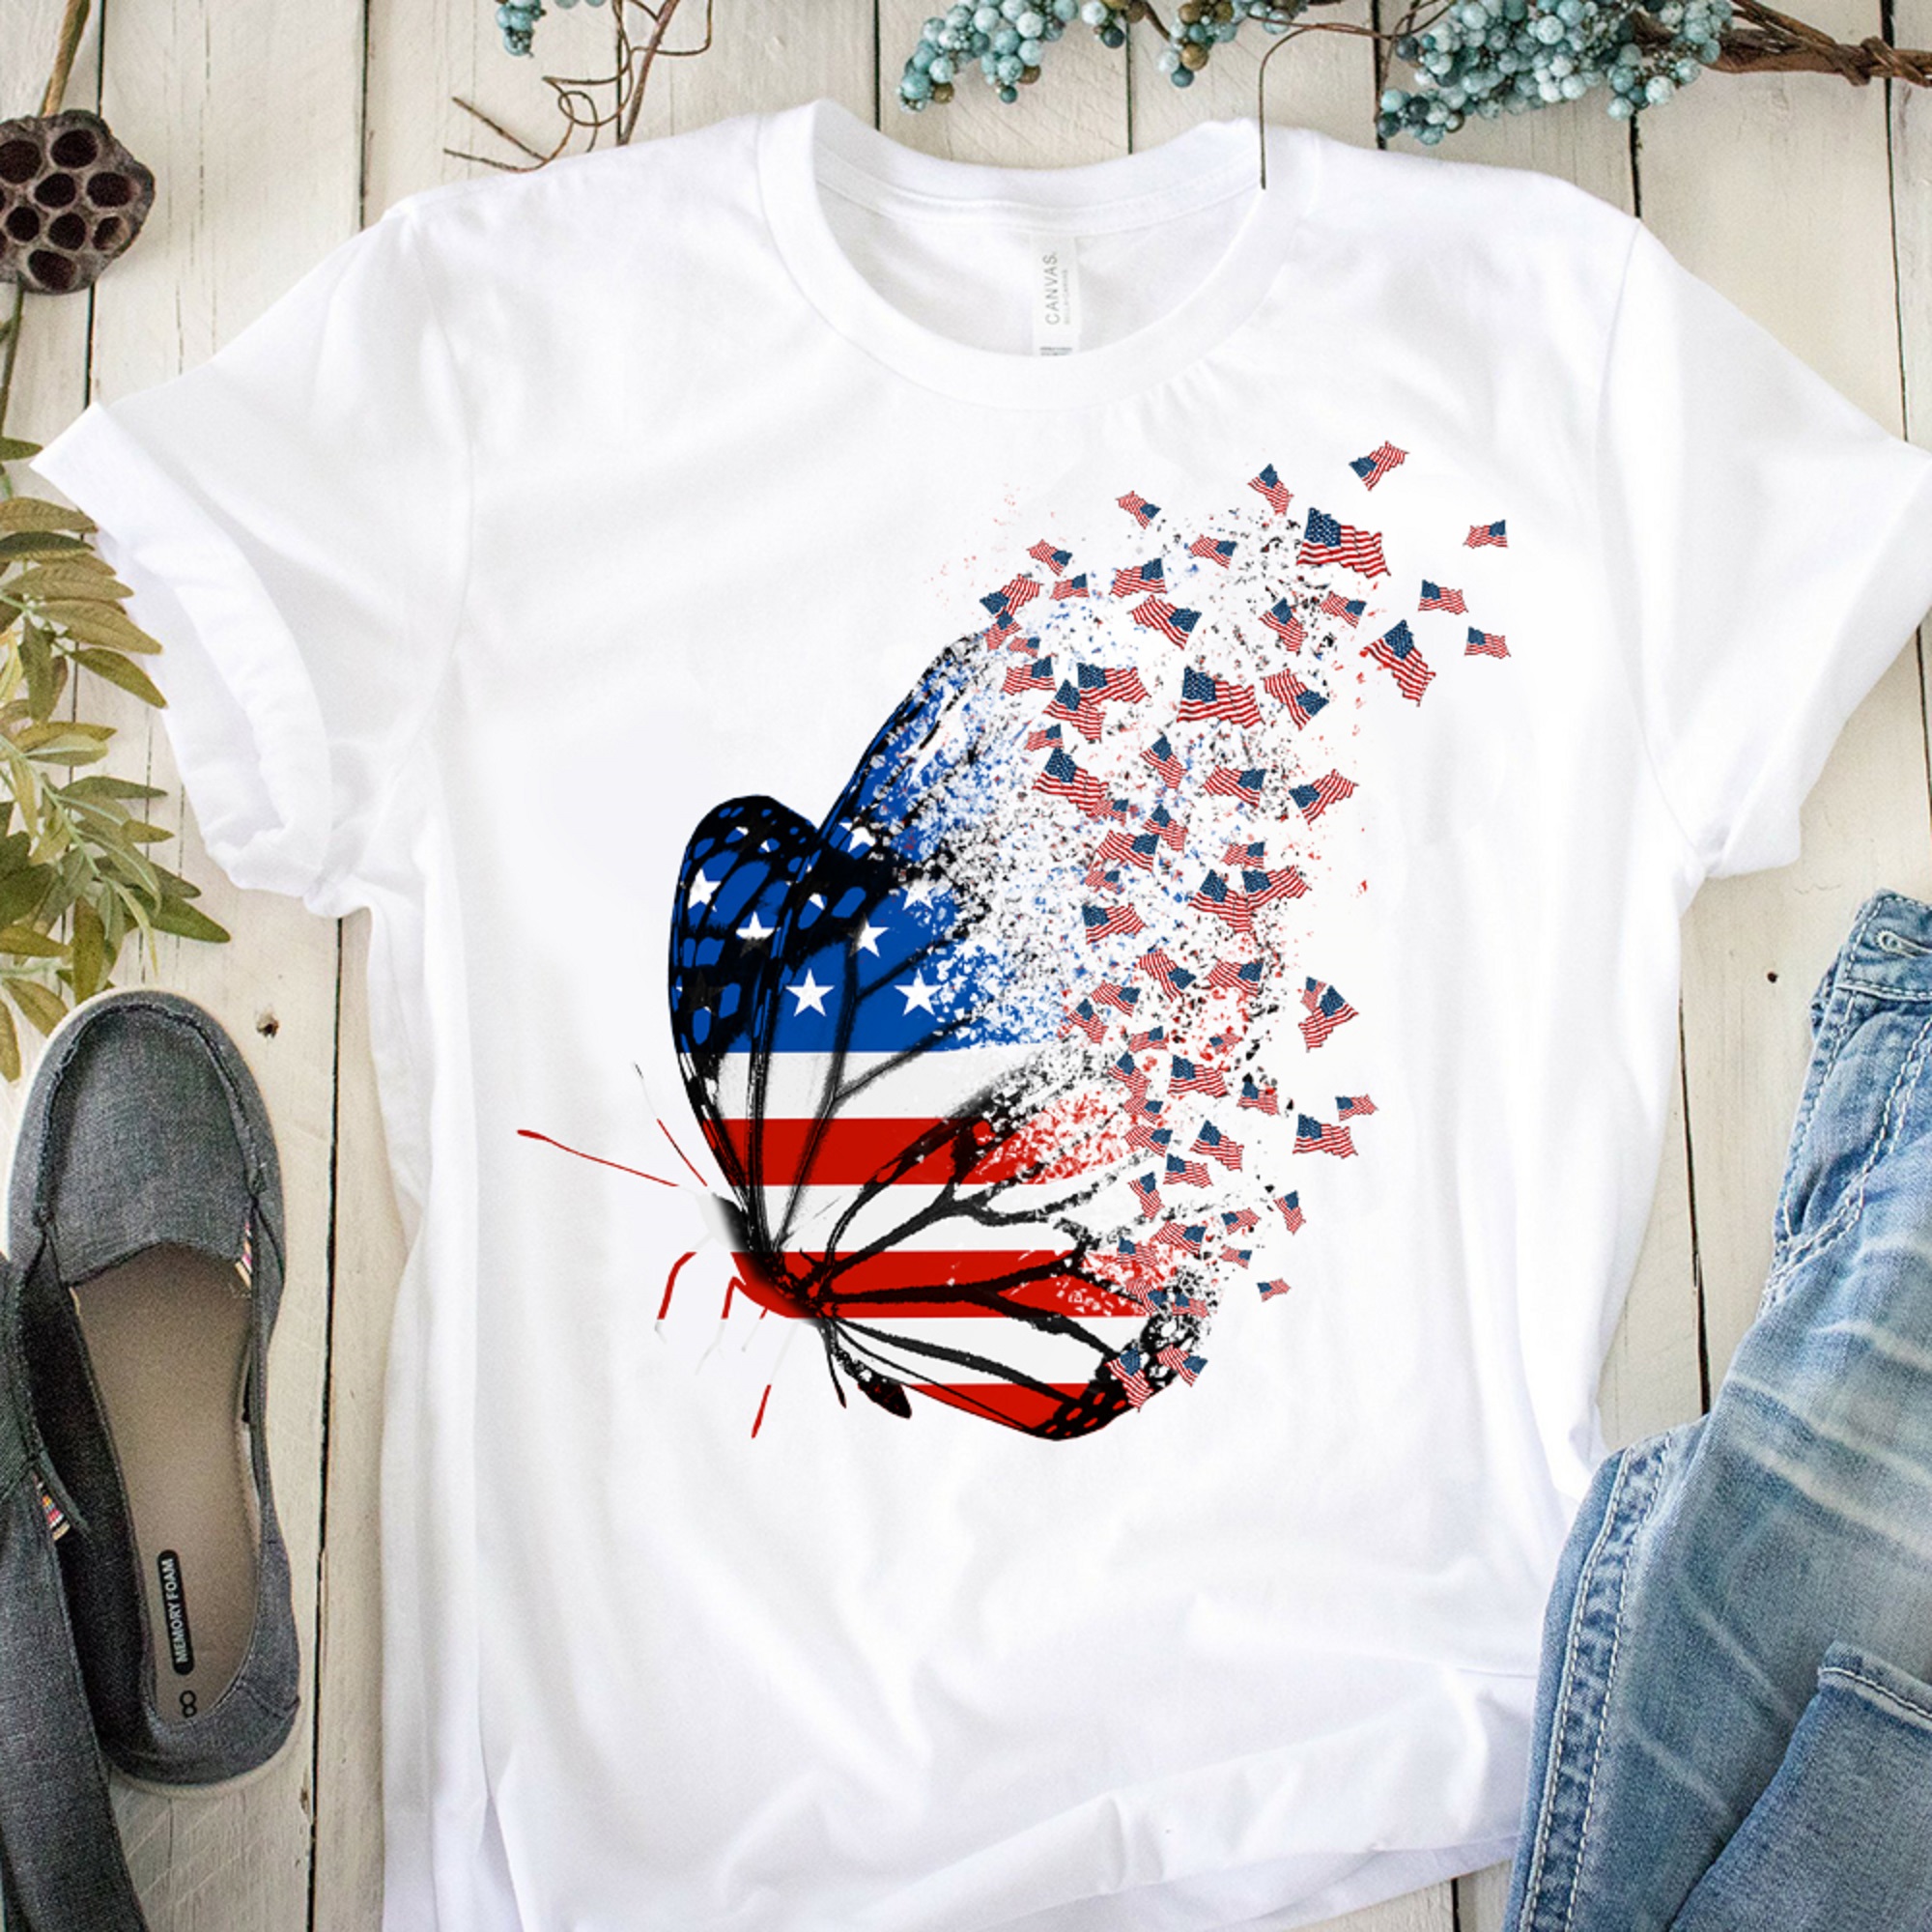 Butterfly and America flag - The independence day, 4th of July